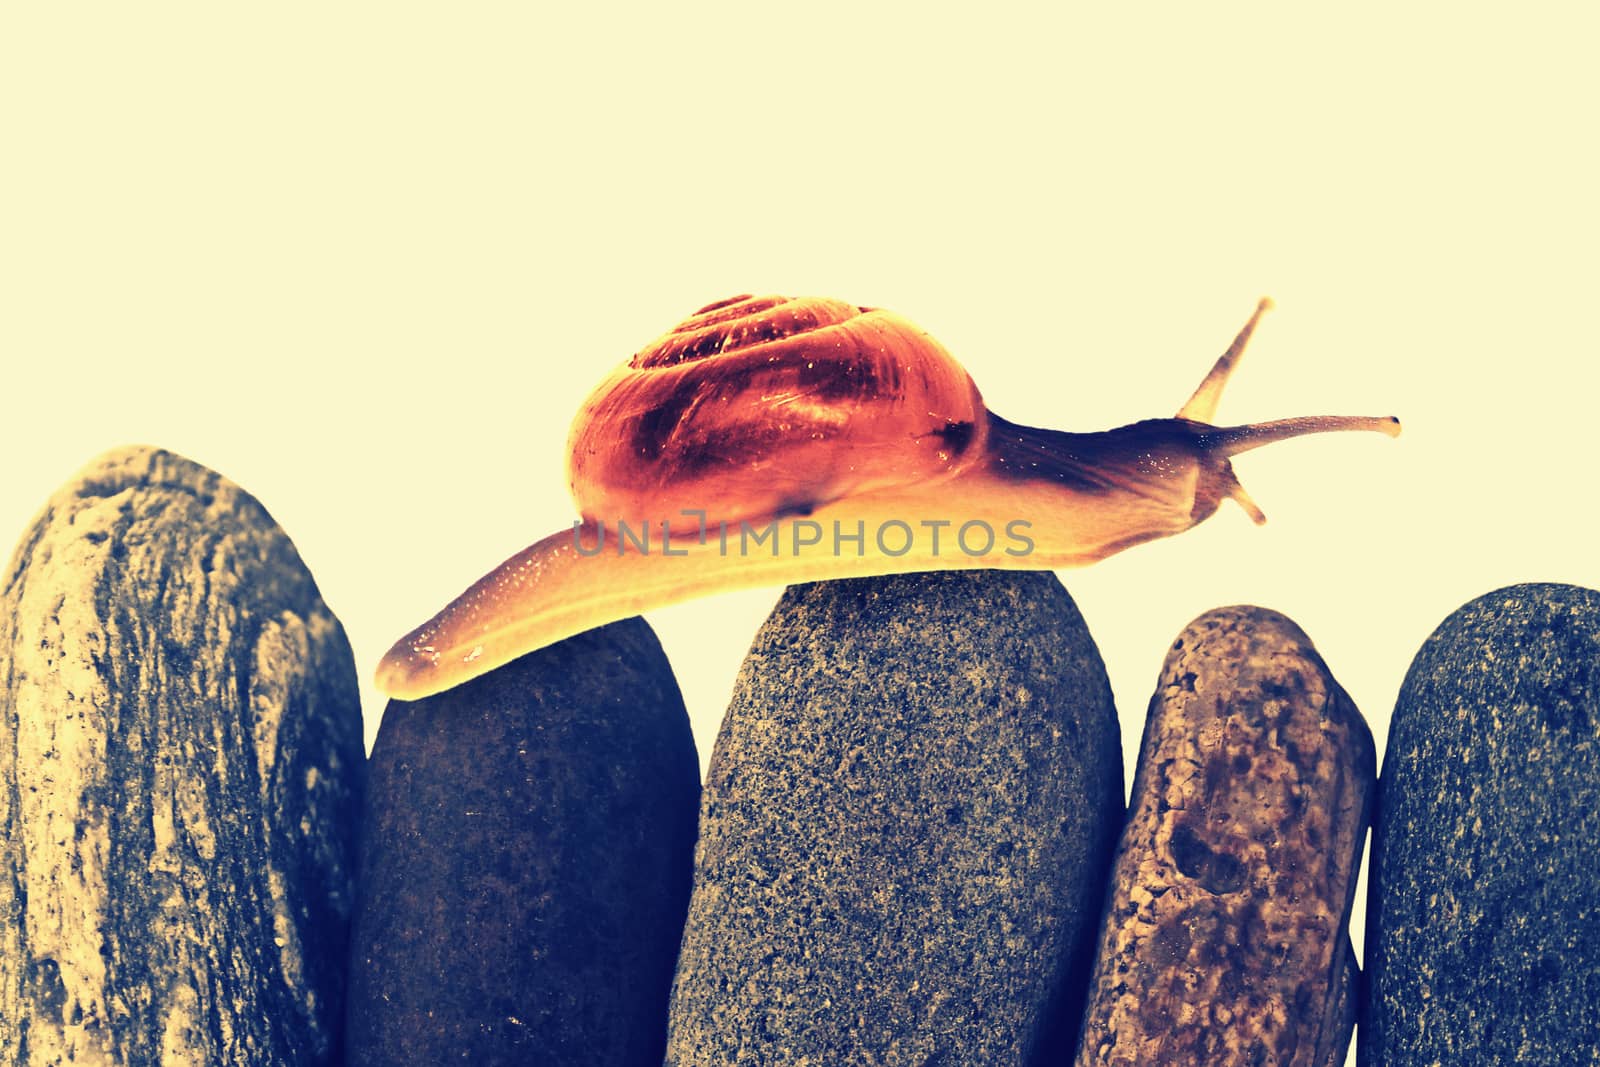 Snail on top of stacked pebbles